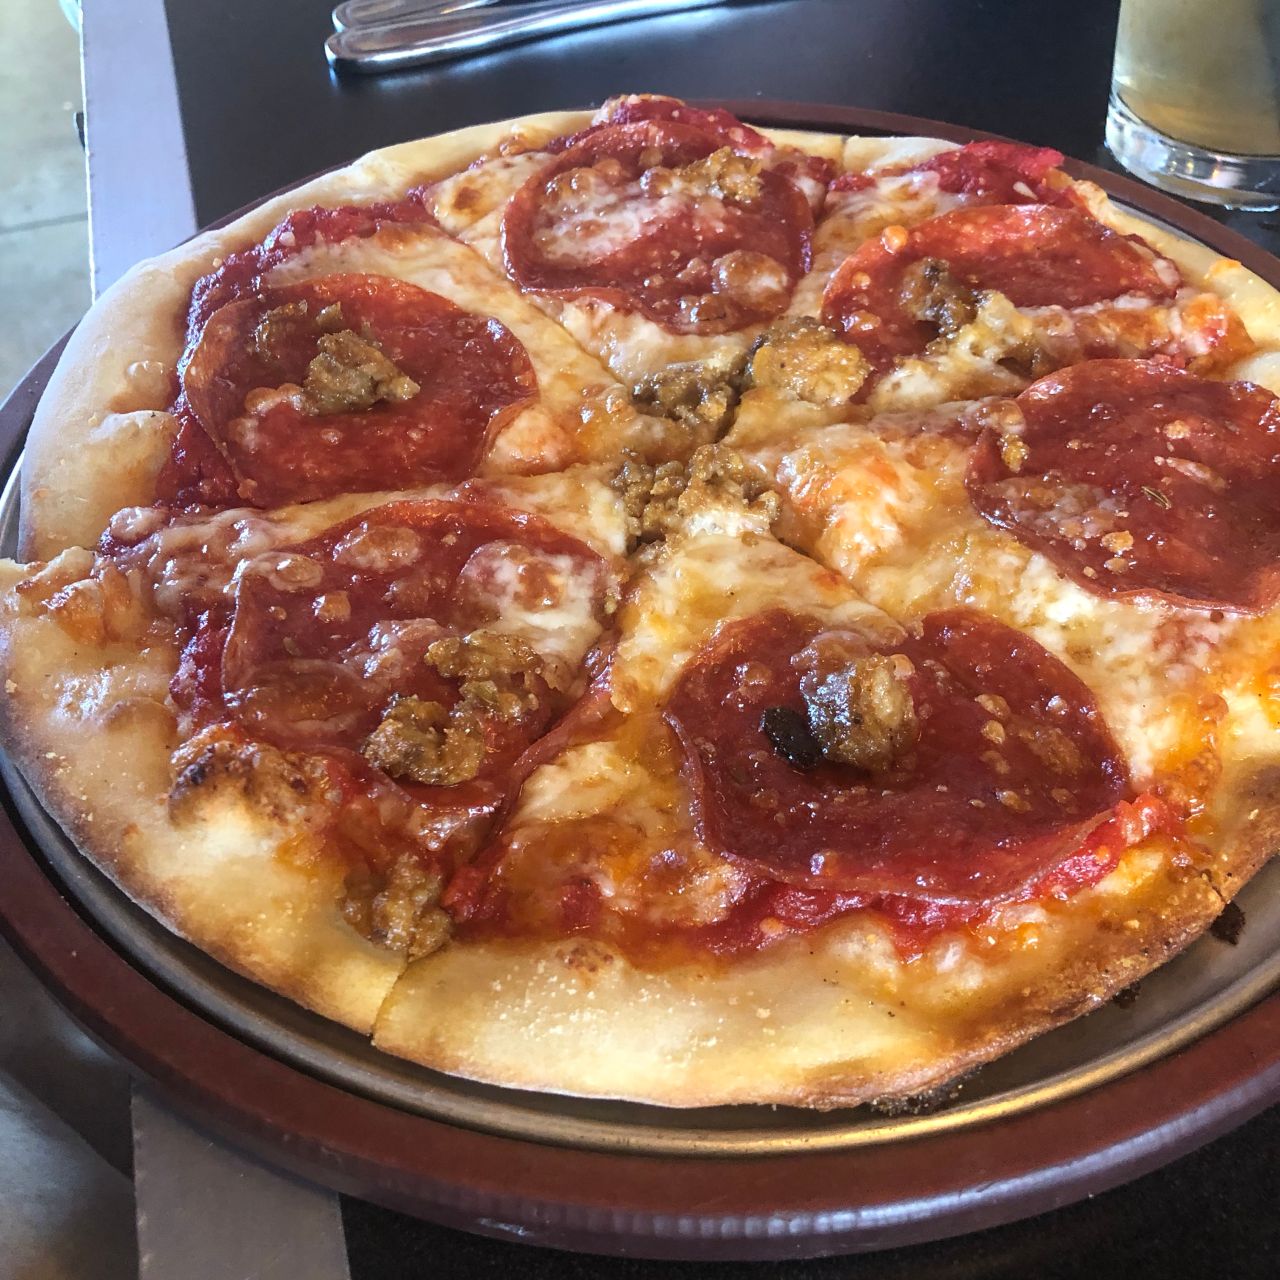 The Rock Wood Fired Pizza - You stopped scrolling? Mission